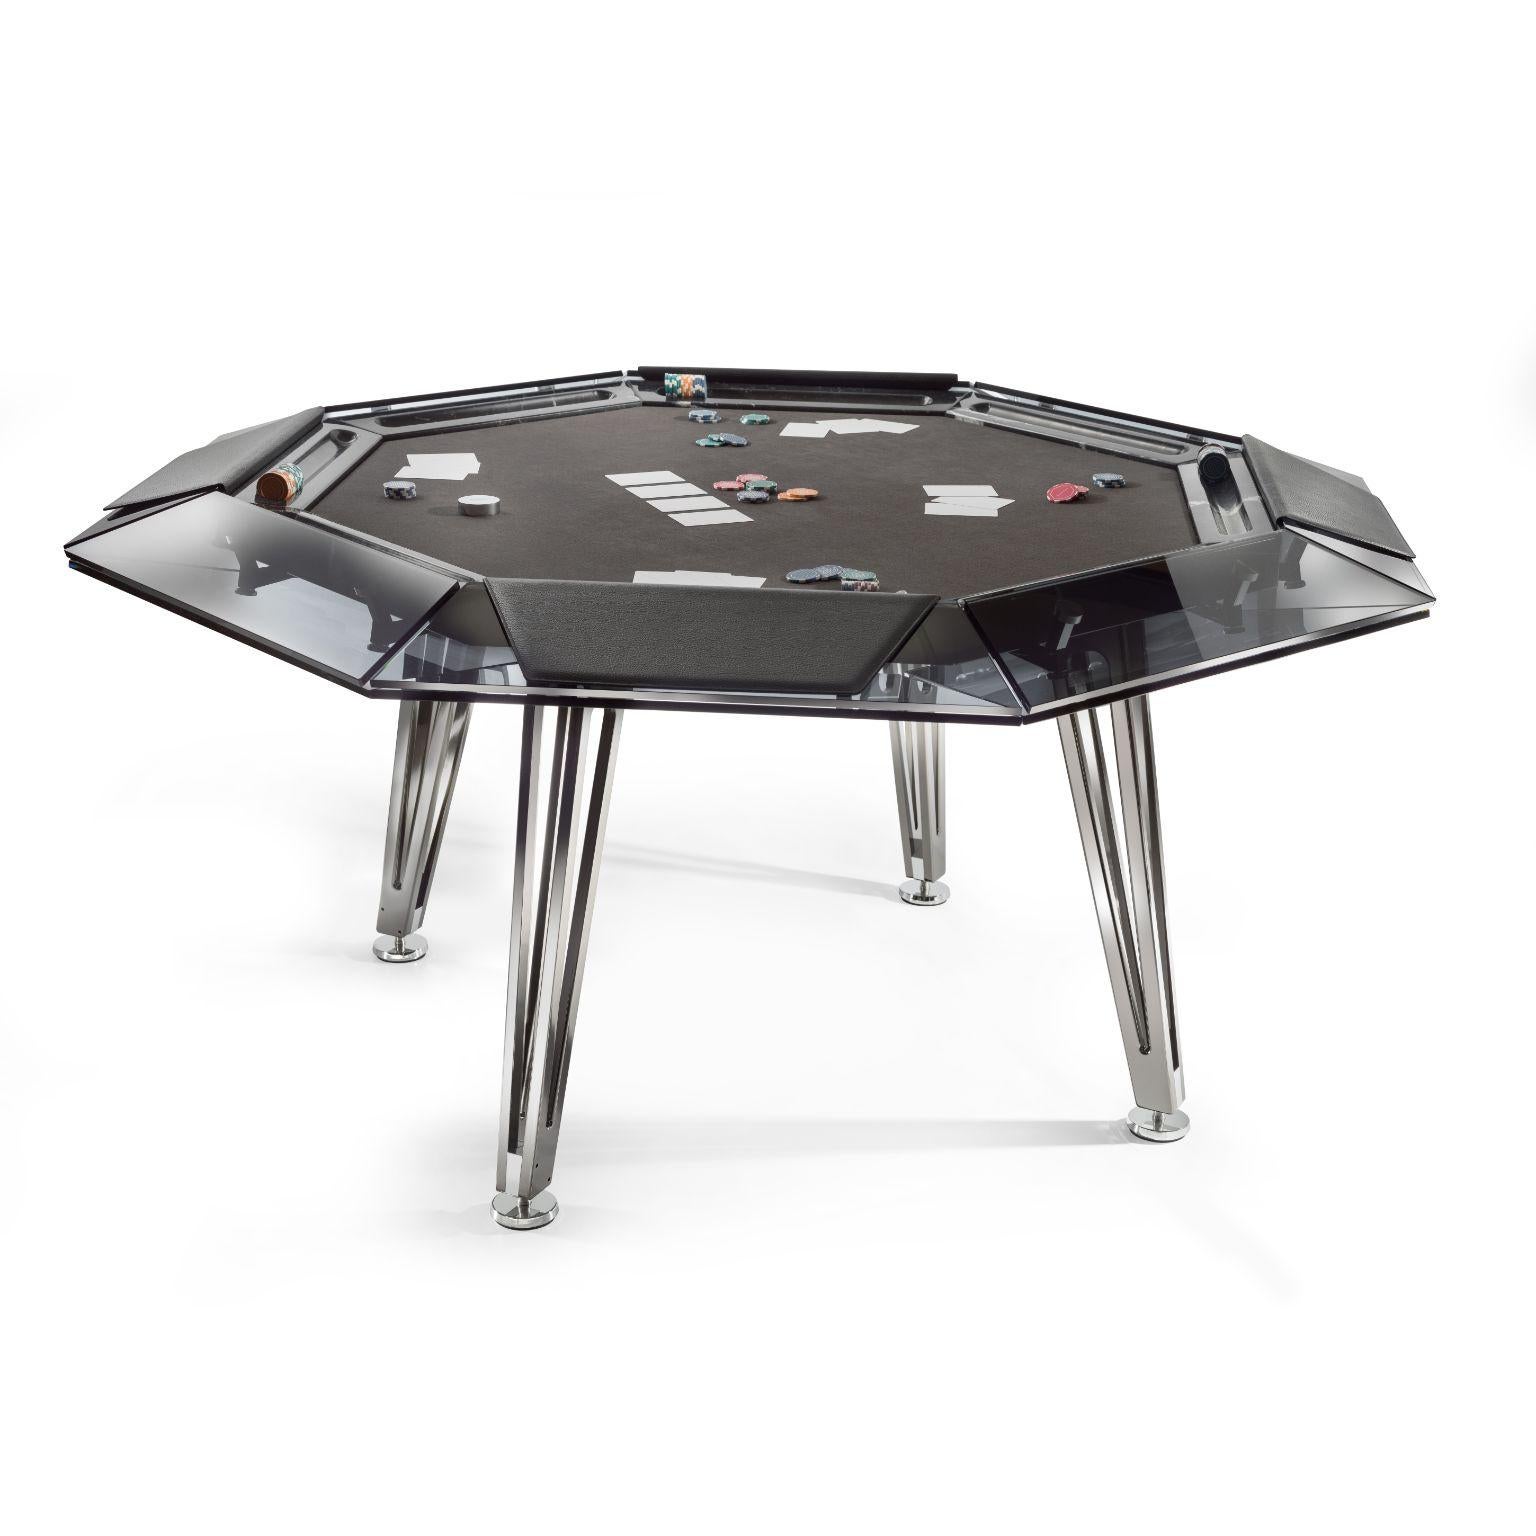 Unootto Black Marble 8 players poker table by Impatia
Dimensions: D156 x W156 x H76 cm
Weight: 110 kg
Material: Smoked glass frame, Black nickel finished metal legs,Marble top frame.
Also Available: 10 payers version and different